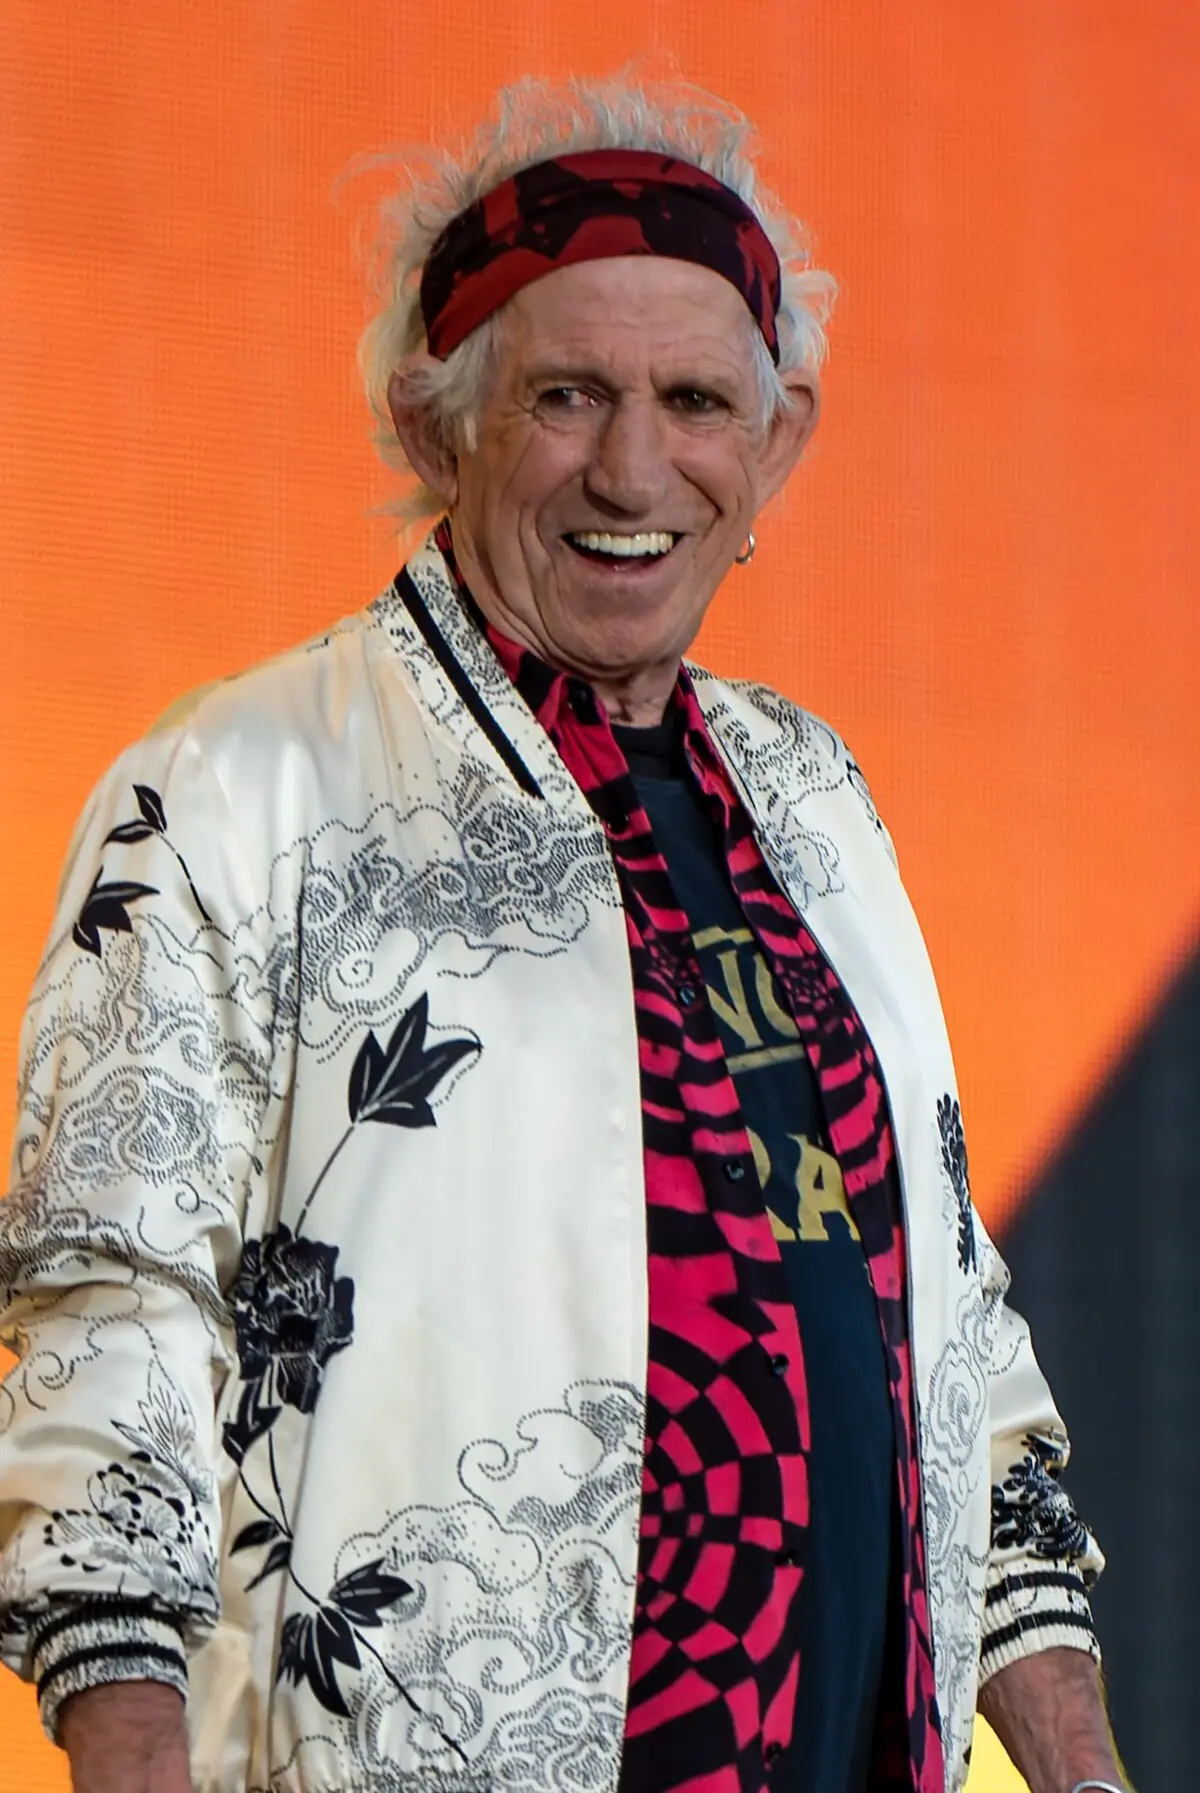 keith richards smoked his dad - What did Keith Richards father do